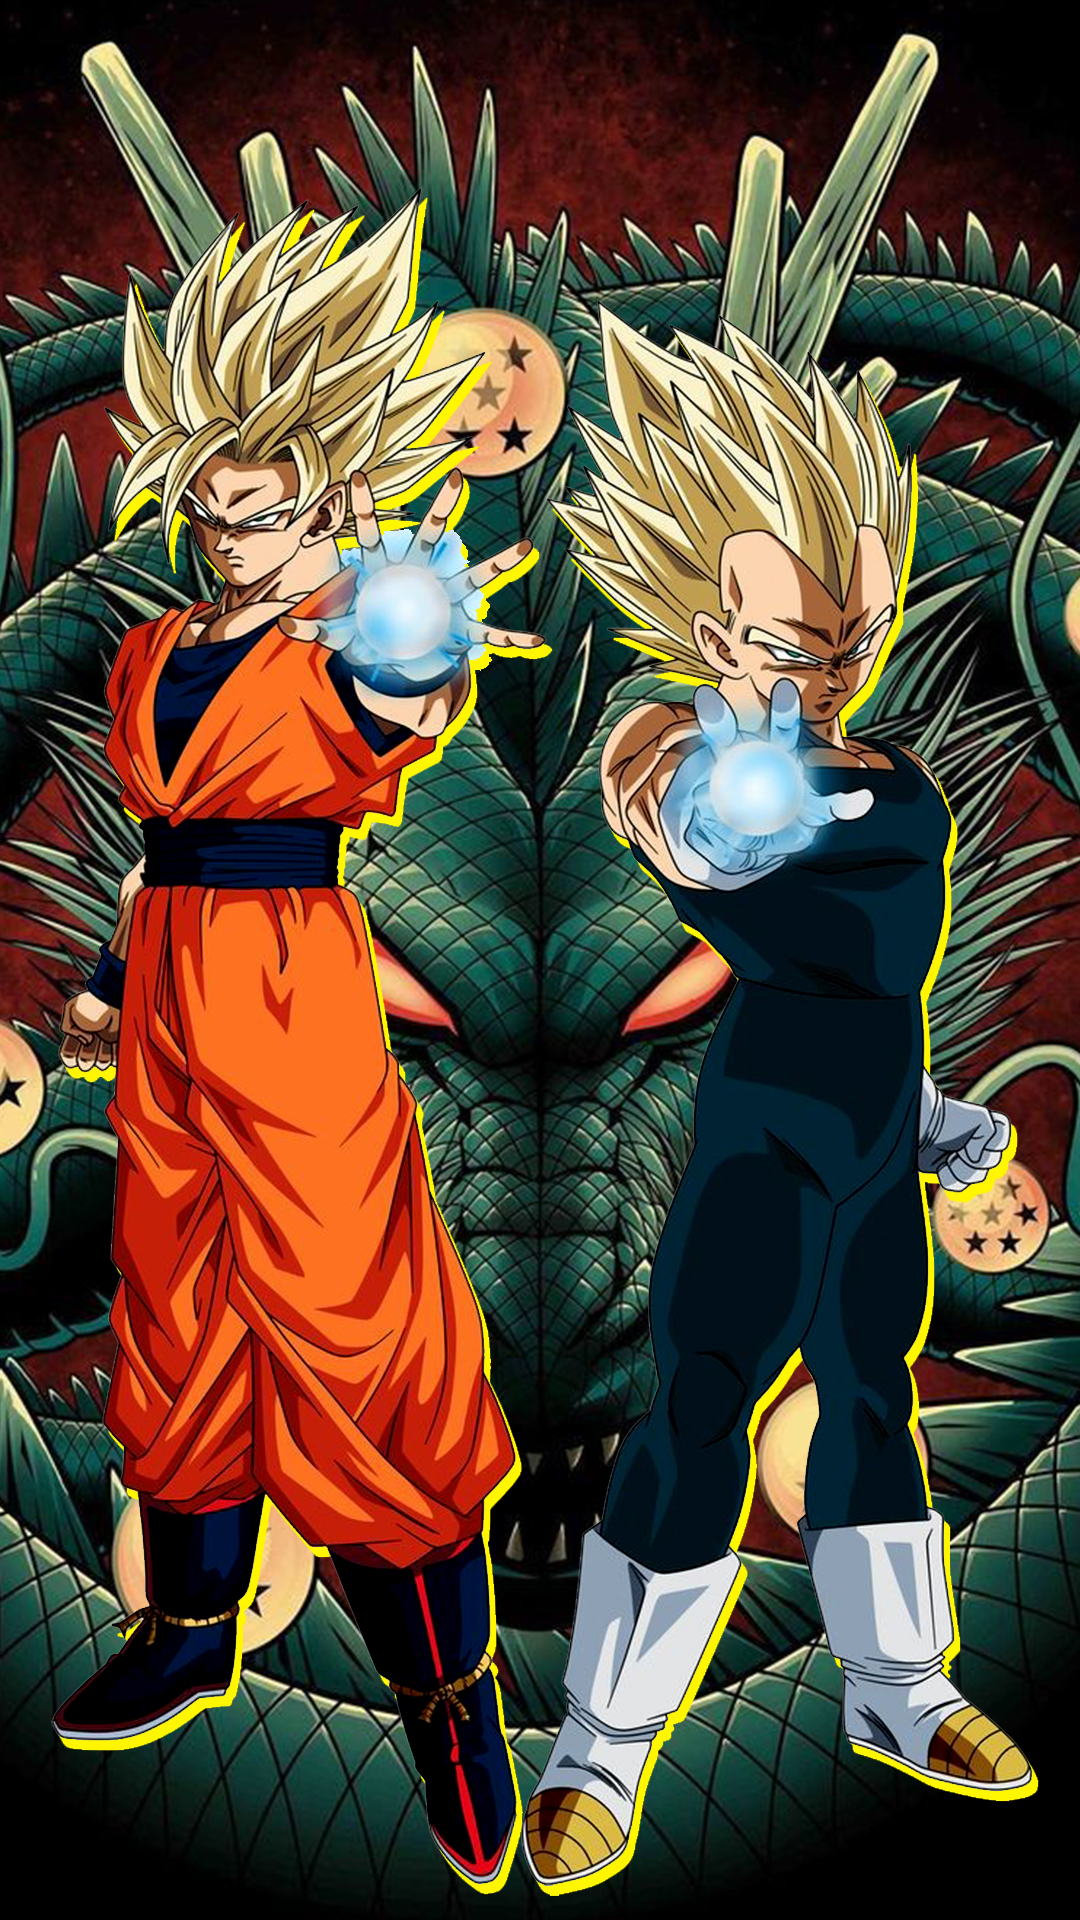 Dragon Ball Z Image - ID: 311351 - Image Abyss